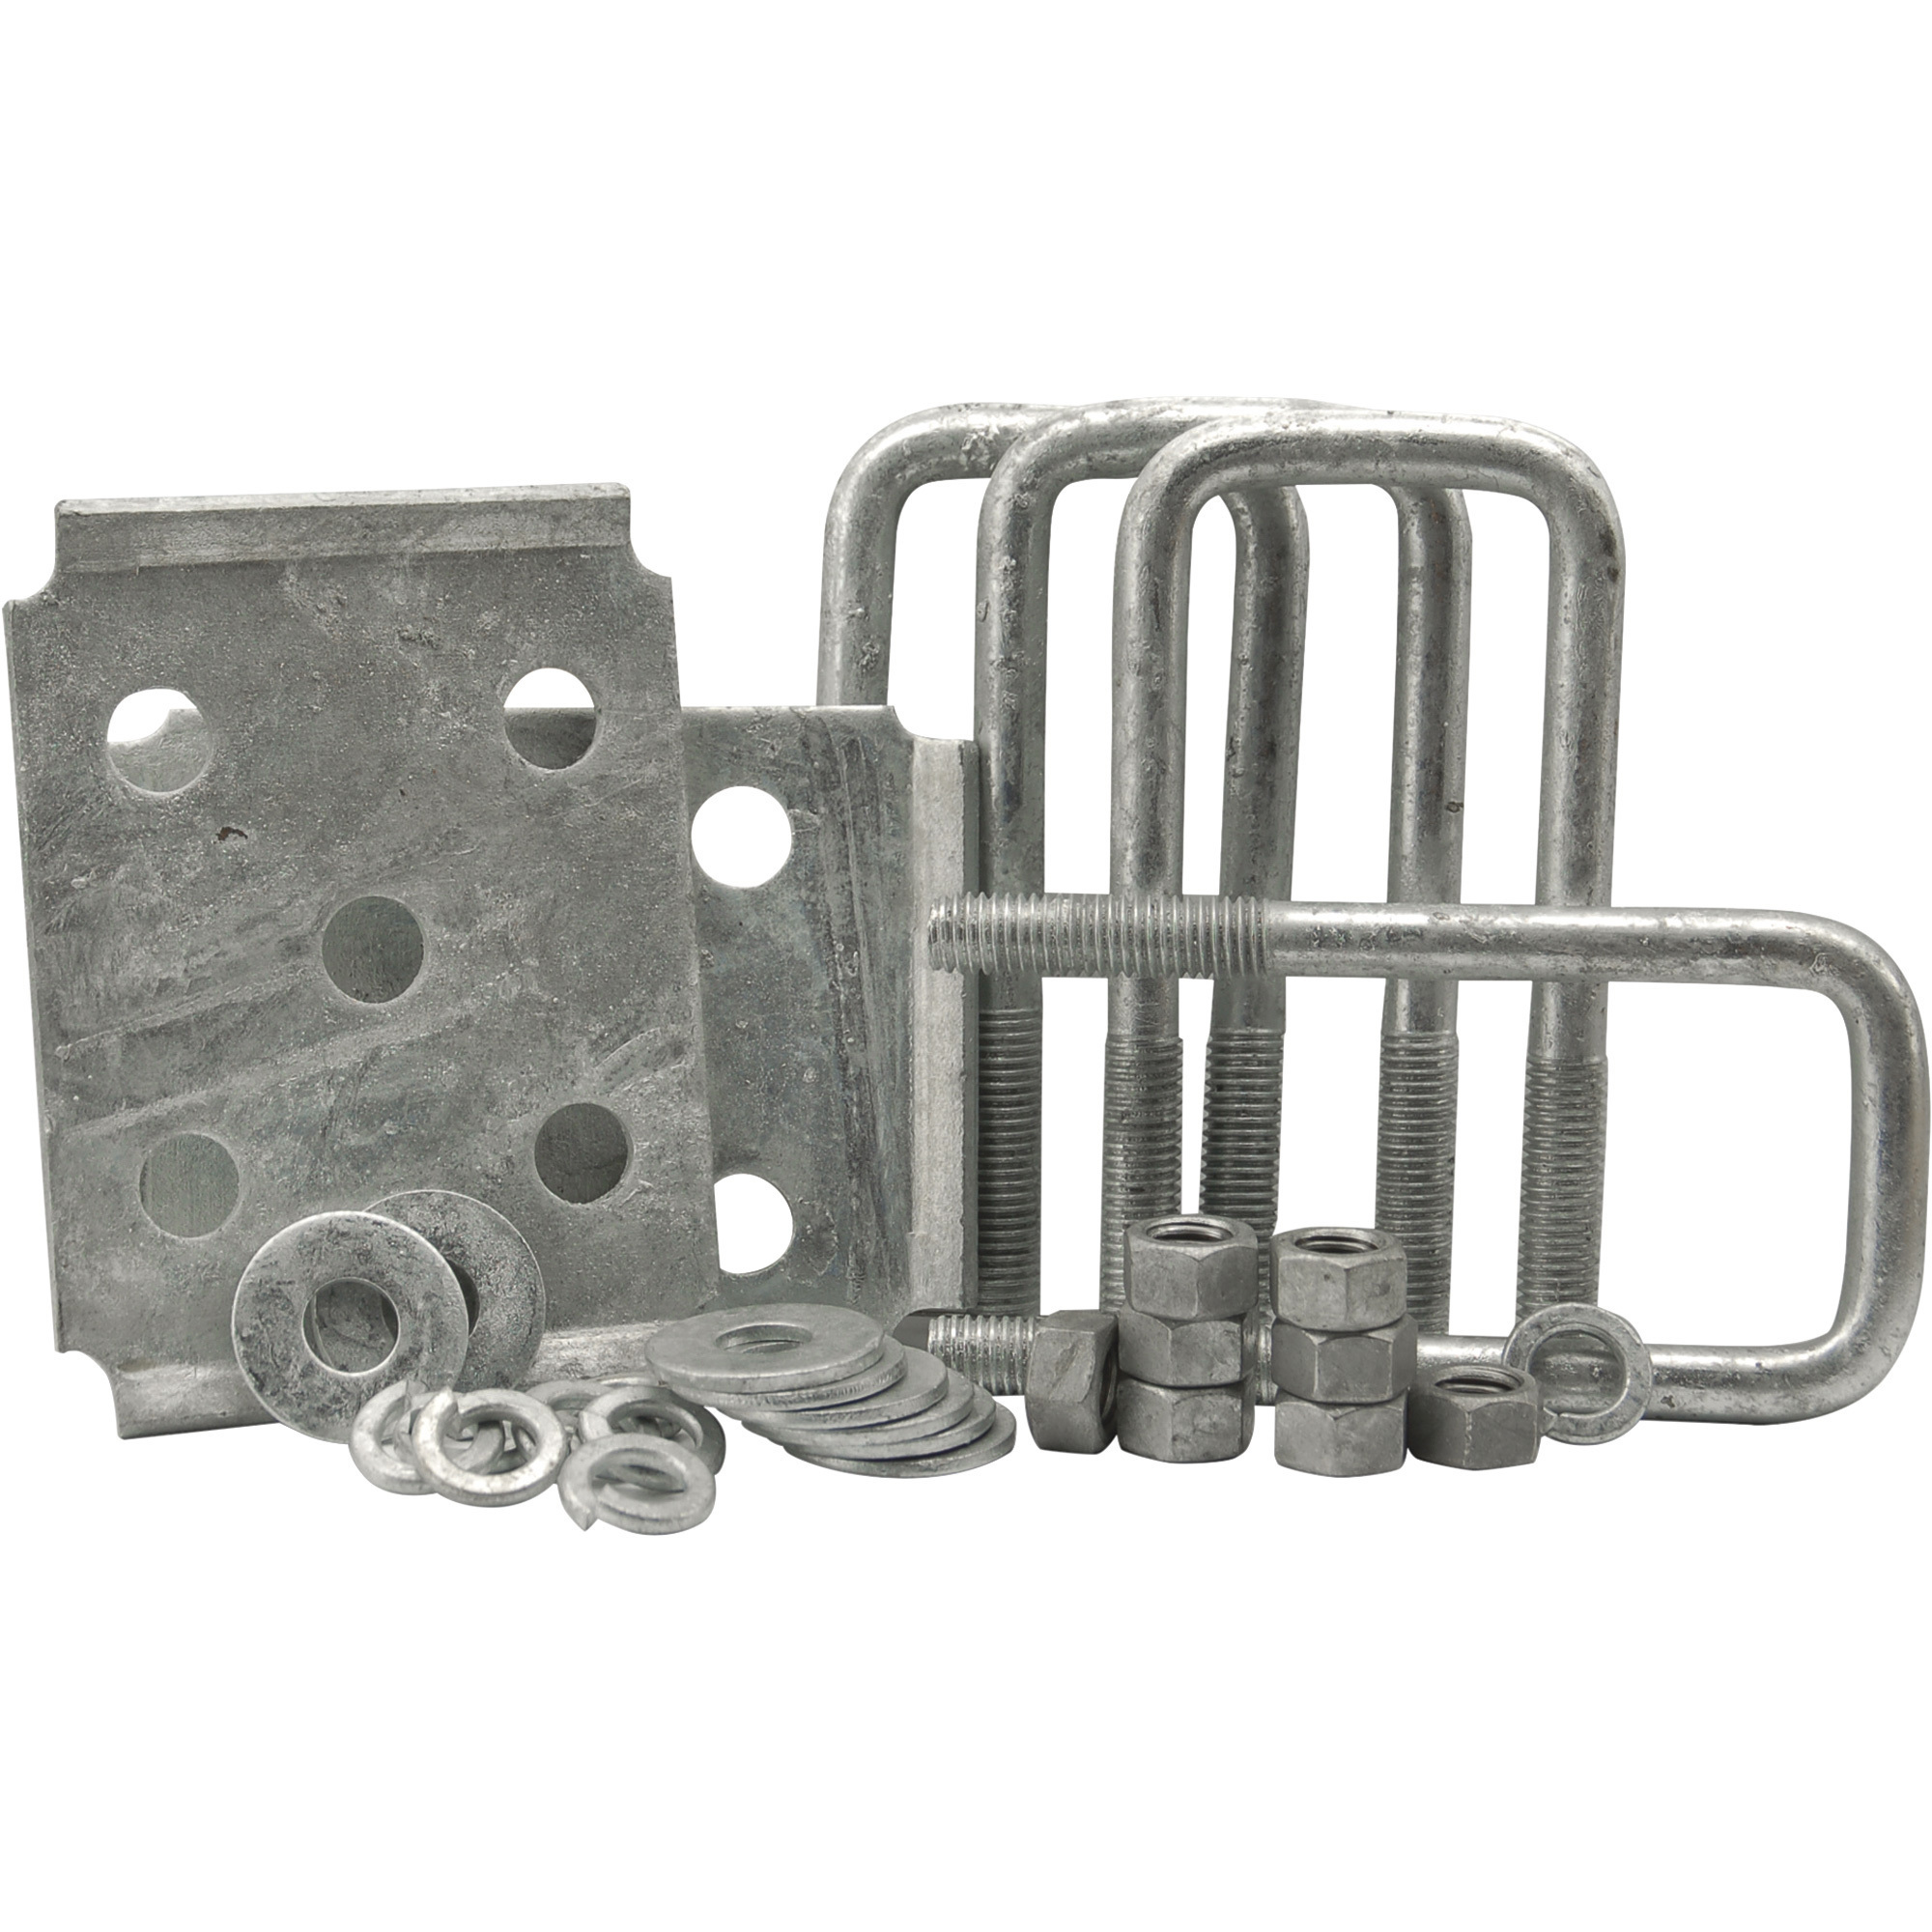 Ultra-Tow 2Inch Square Tube Axle Plate Kit